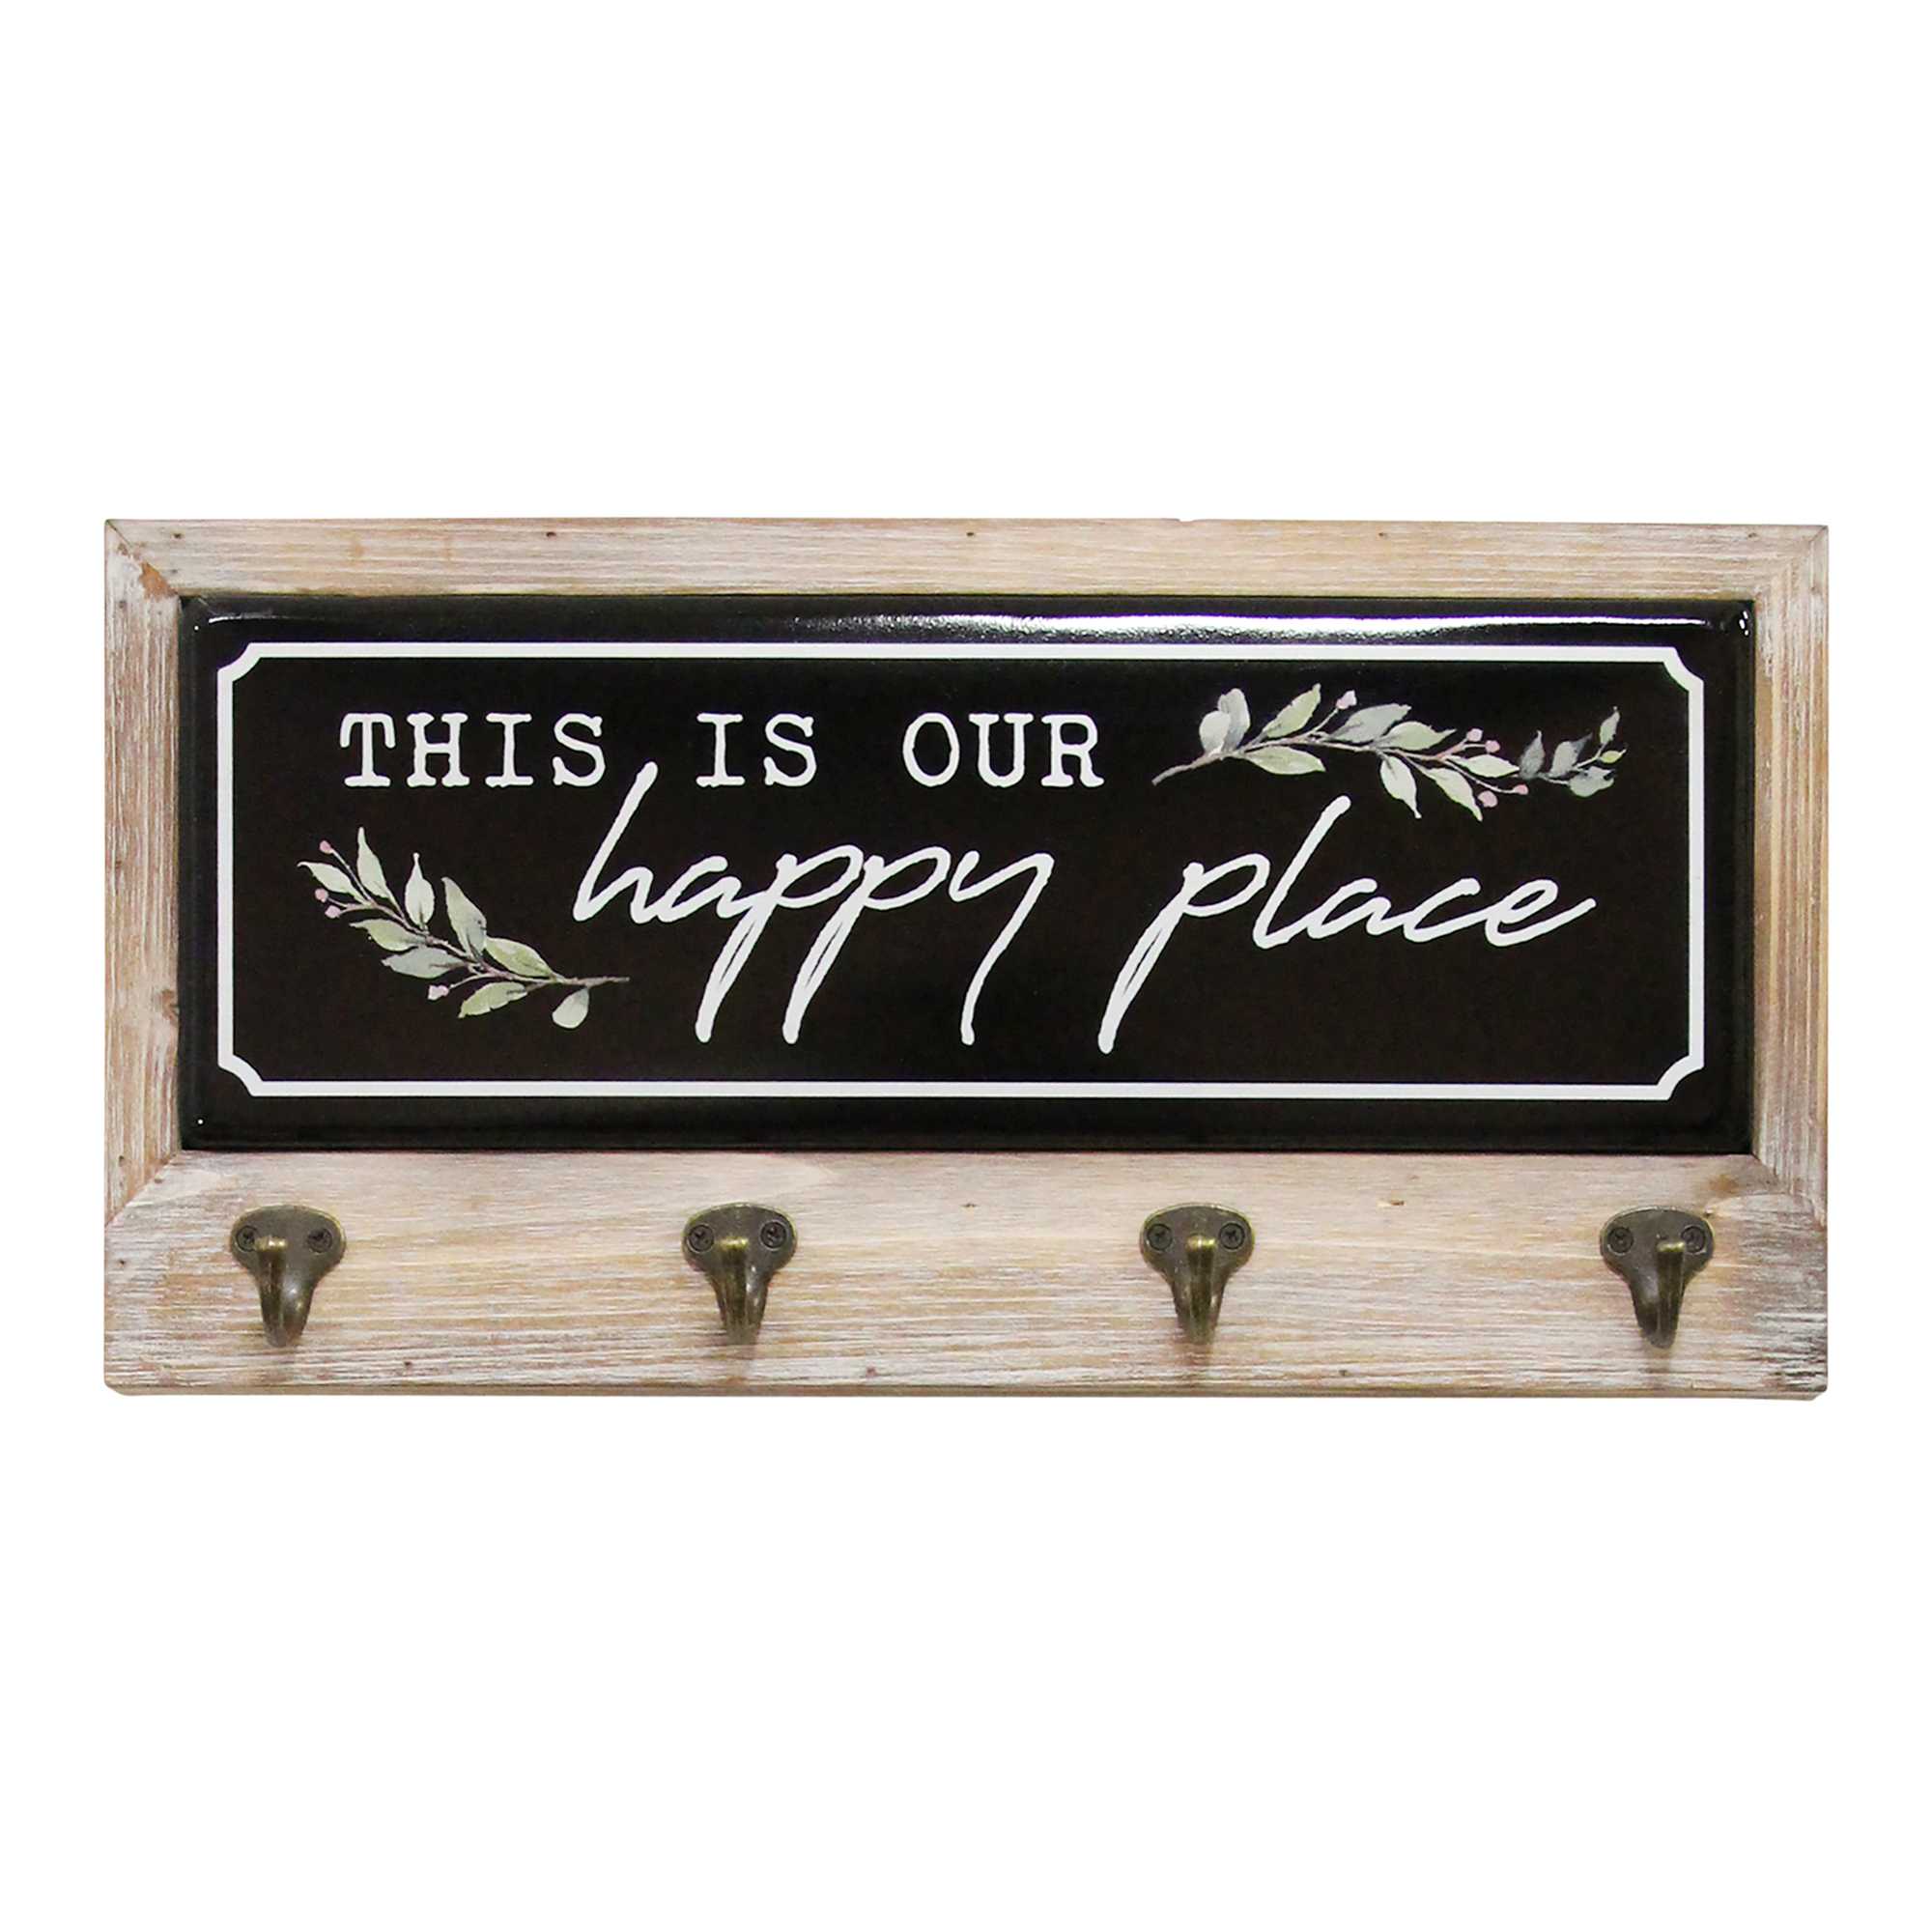 This is Our Happy Place Wood and Metal Coat Rack